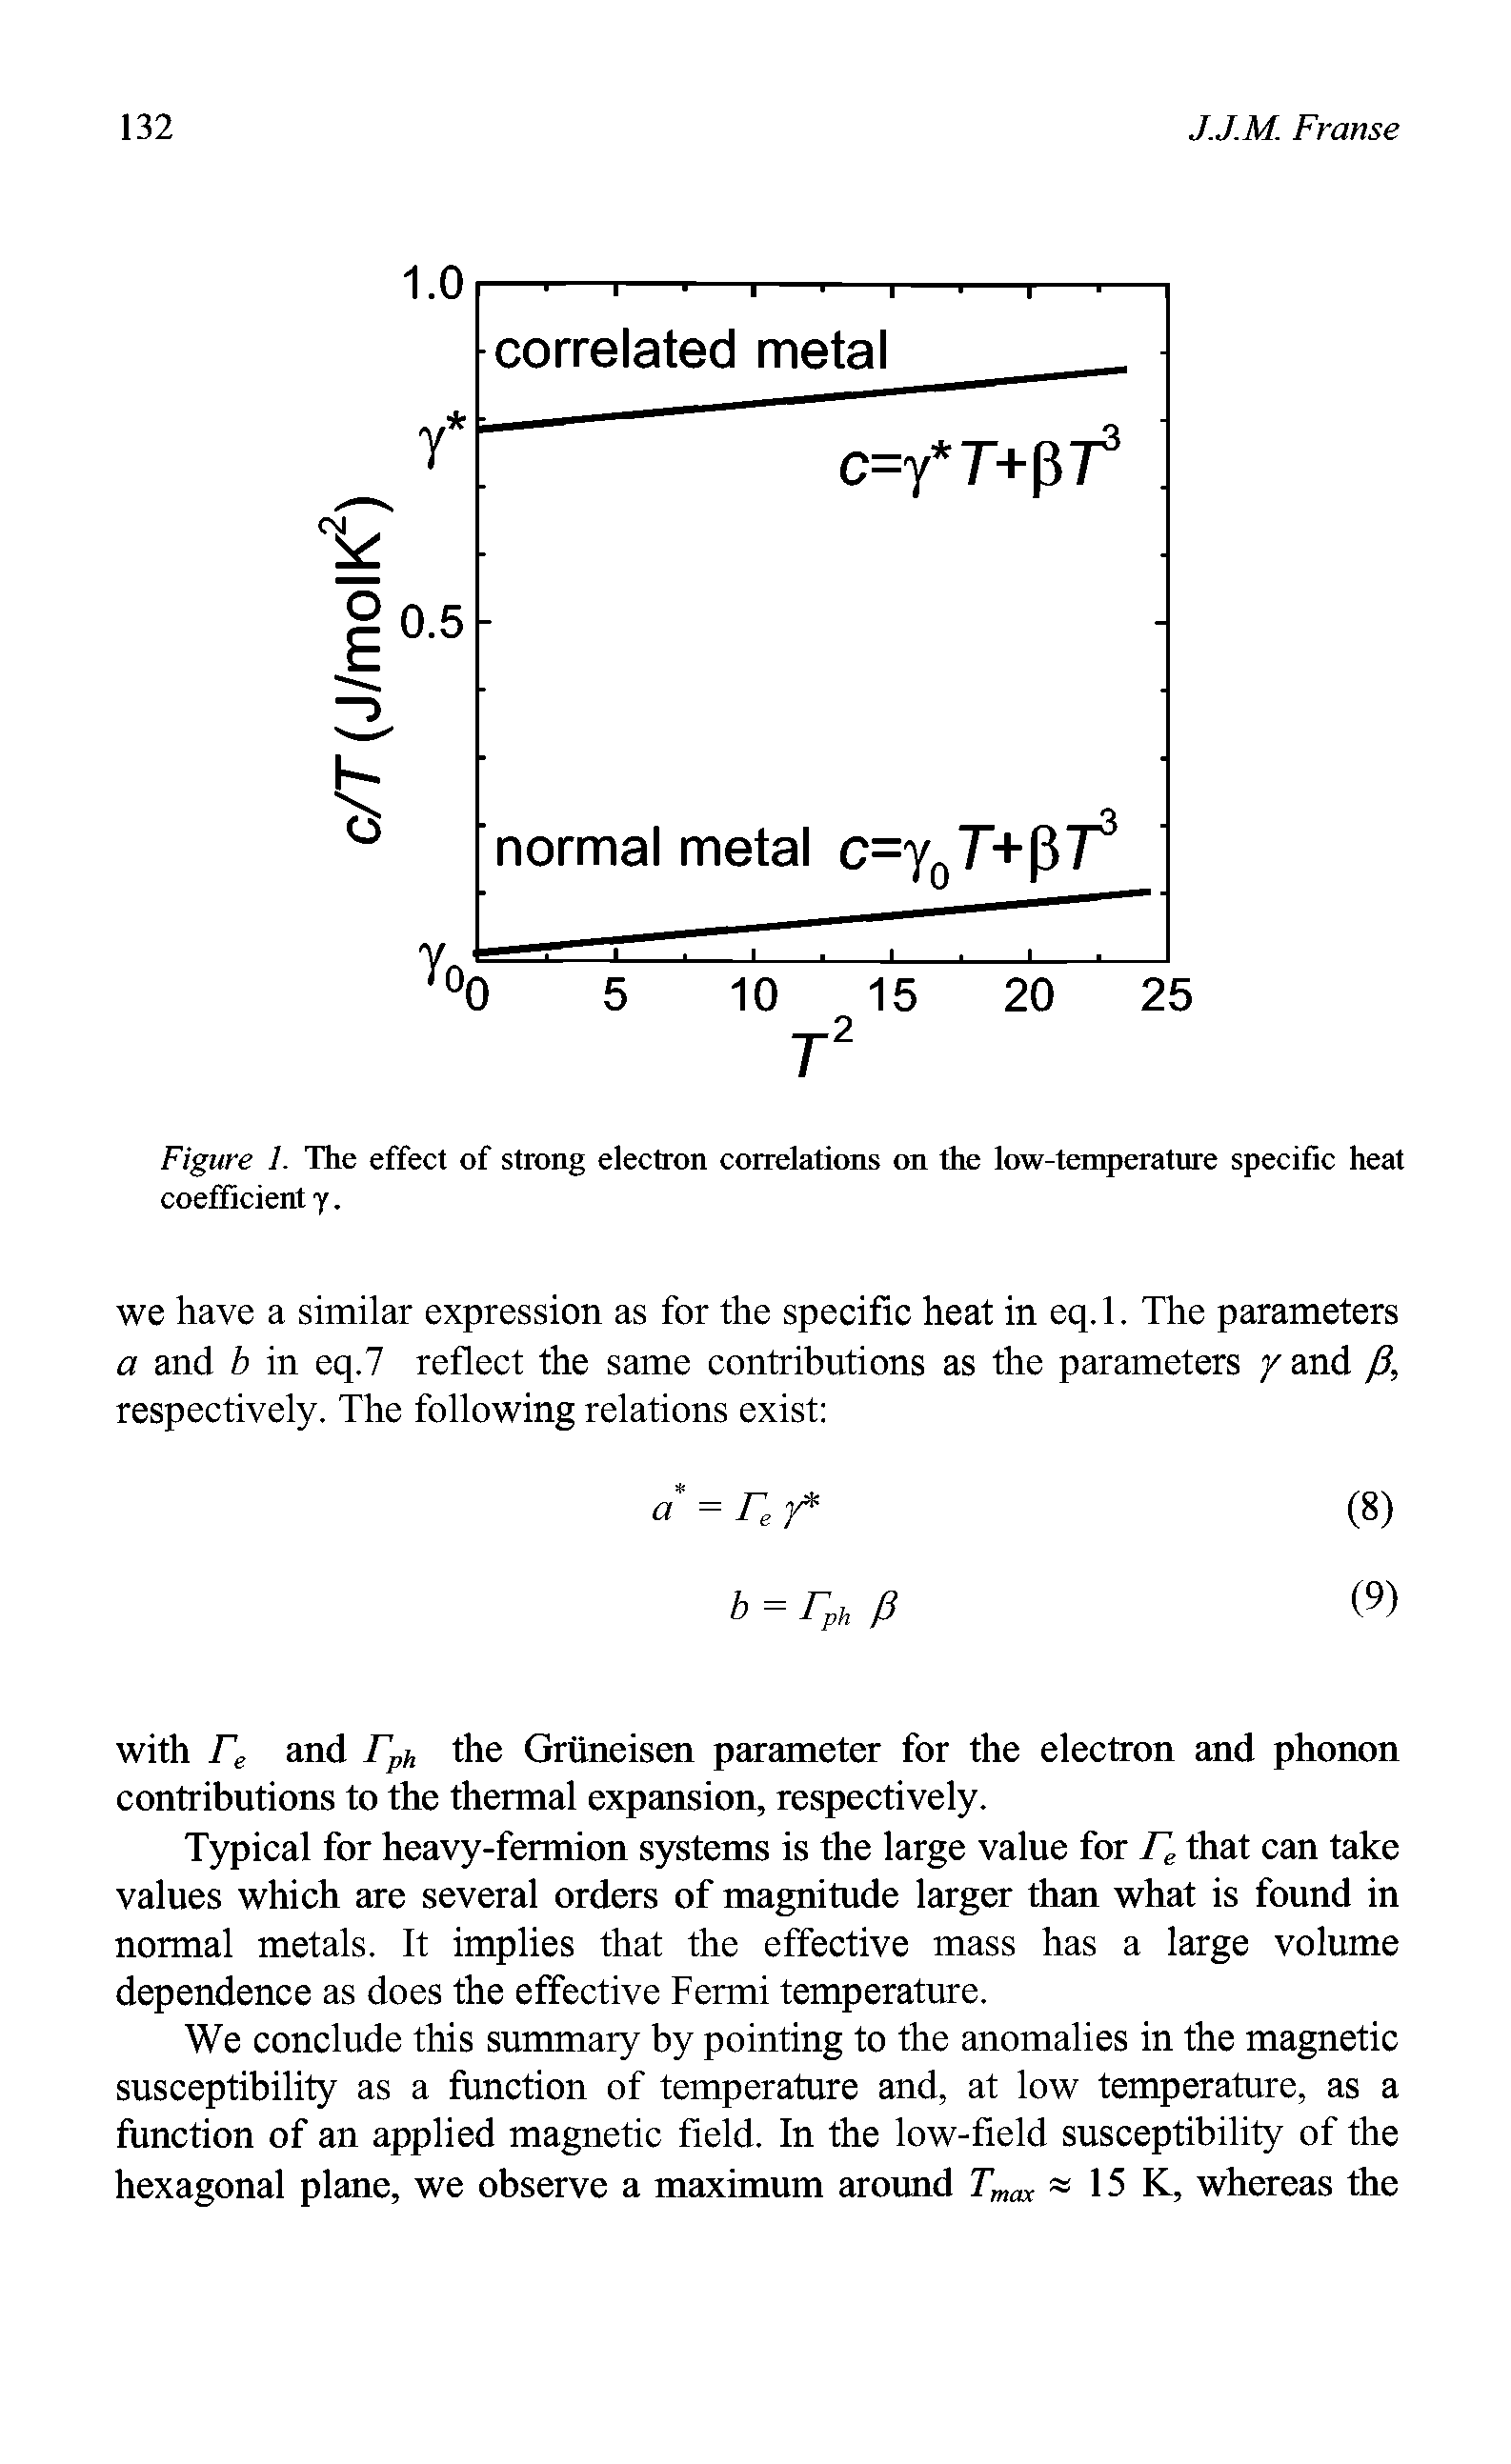 Figure 1. The effect of strong electron correlations on the low-temperature specific heat coefficient y.